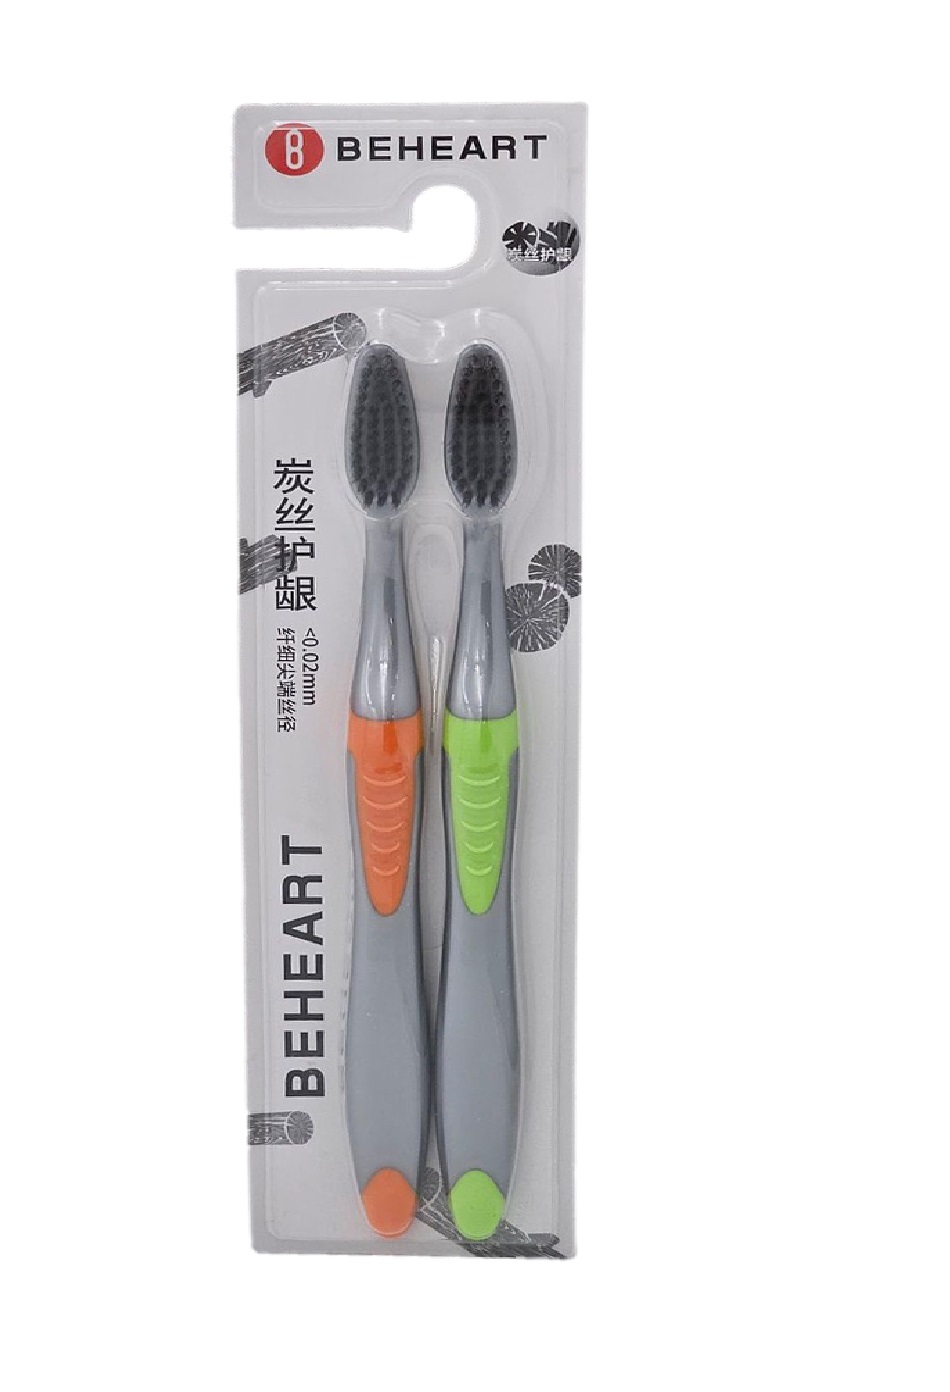 Зубные щетки Beheart Carbon Wire Gingival Protection Toothbrush T101, 2 шт зубные щетки beheart carbon wire gingival protection toothbrush t101 2 шт